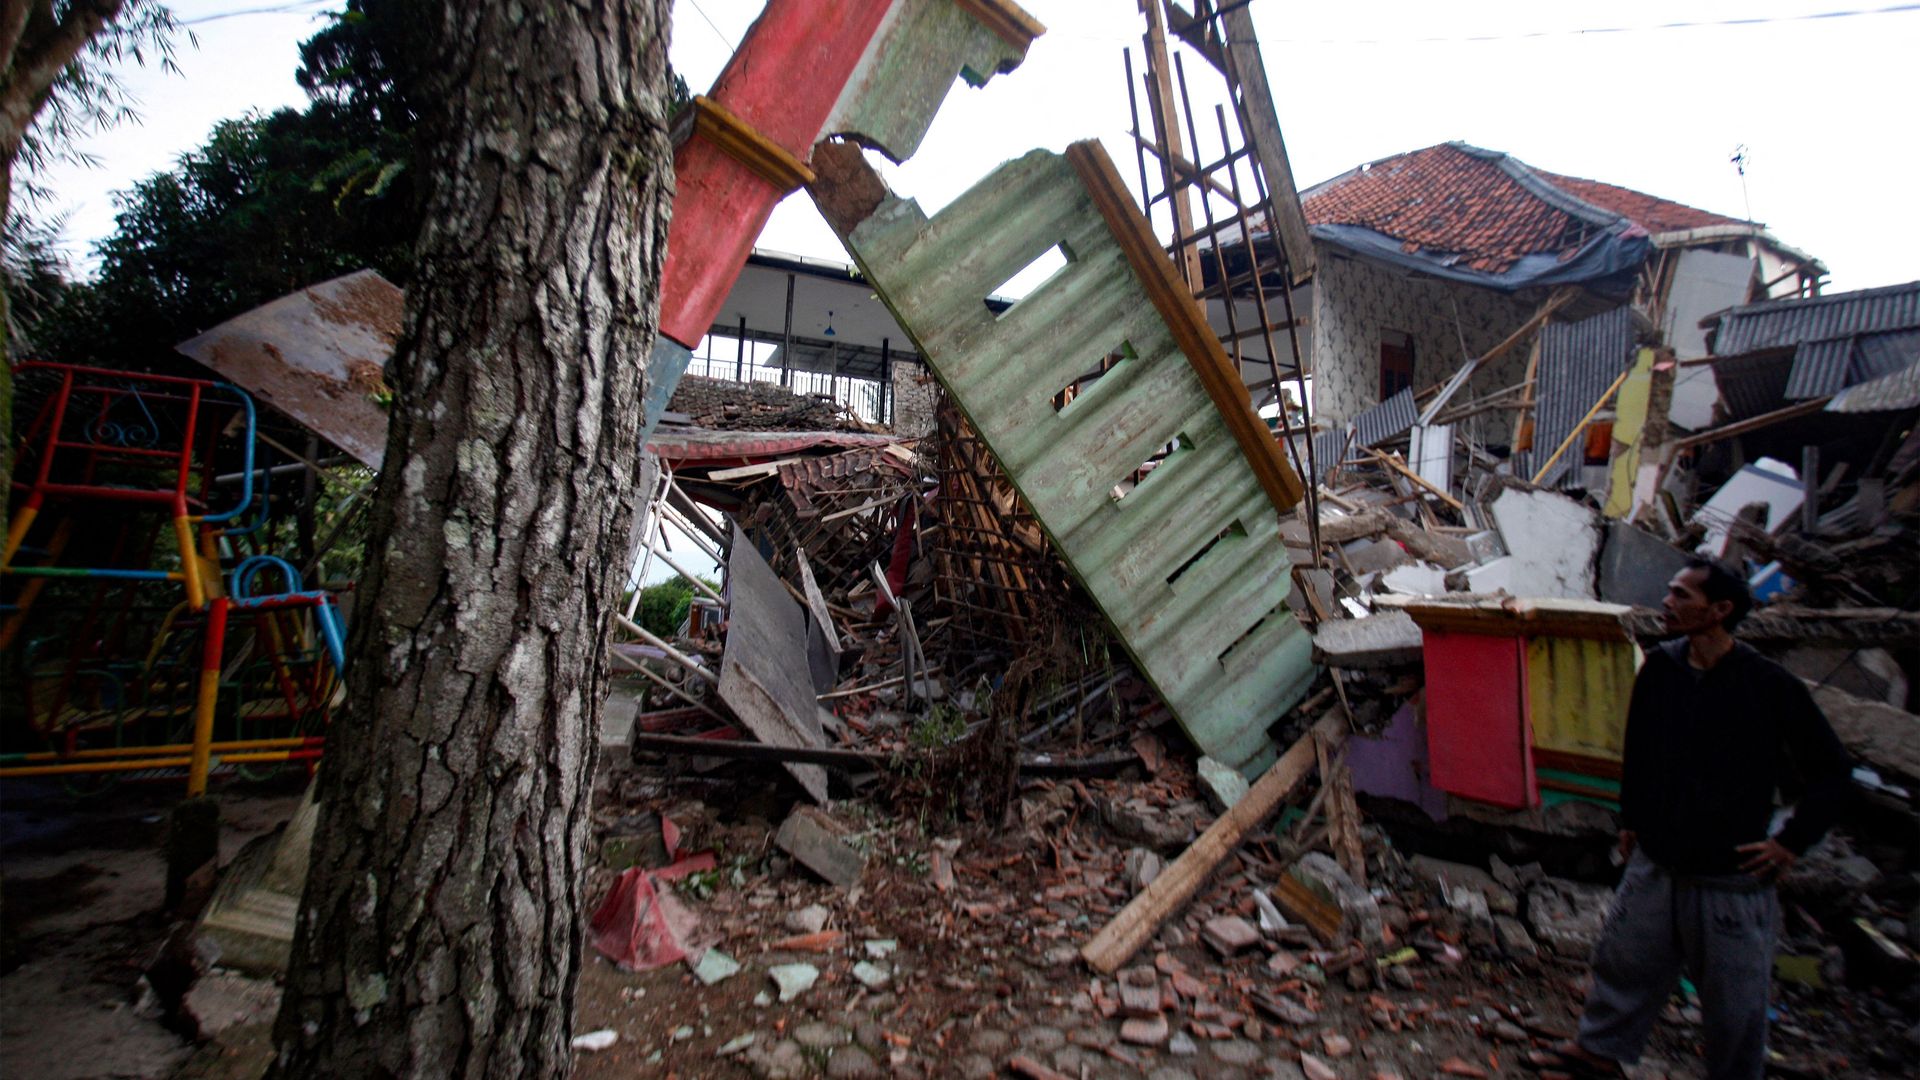 A man stands beside damaged houses following an earthquake in Cianjur on November 21